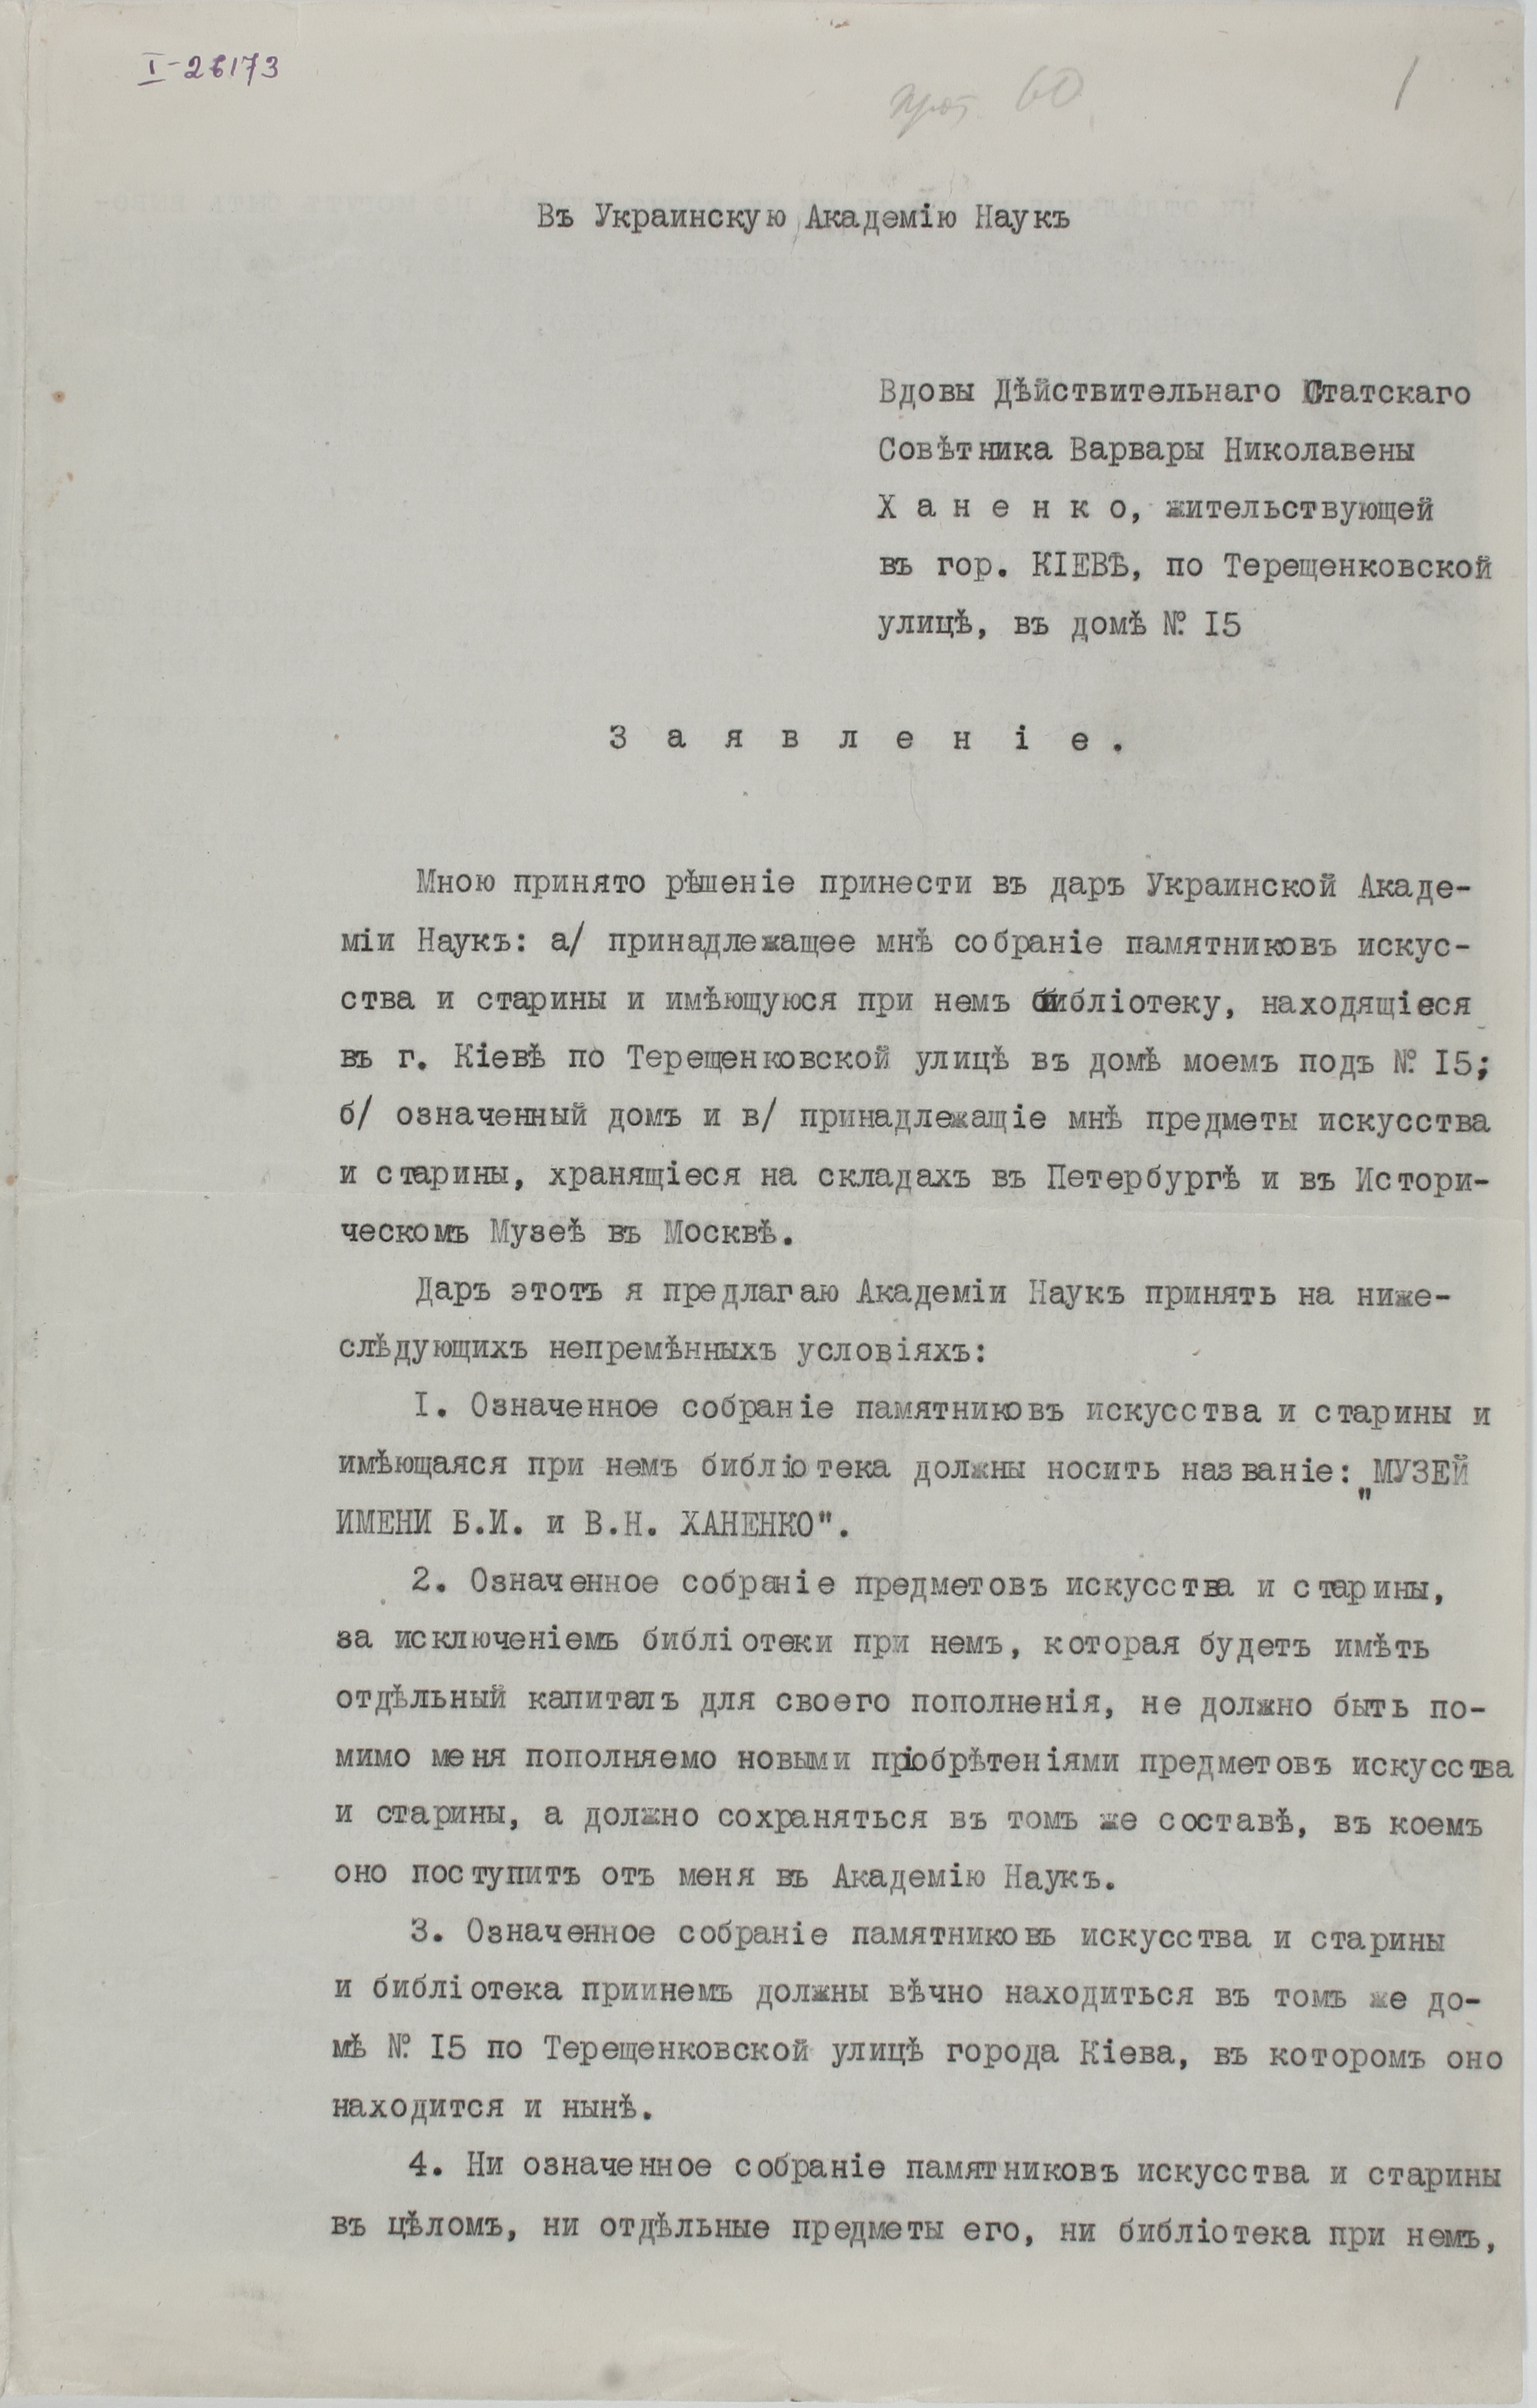 Varvara Khanenko's Deed of Gift on the mansion and the collection, 1918. Courtesy of the Vernadsky NLU.